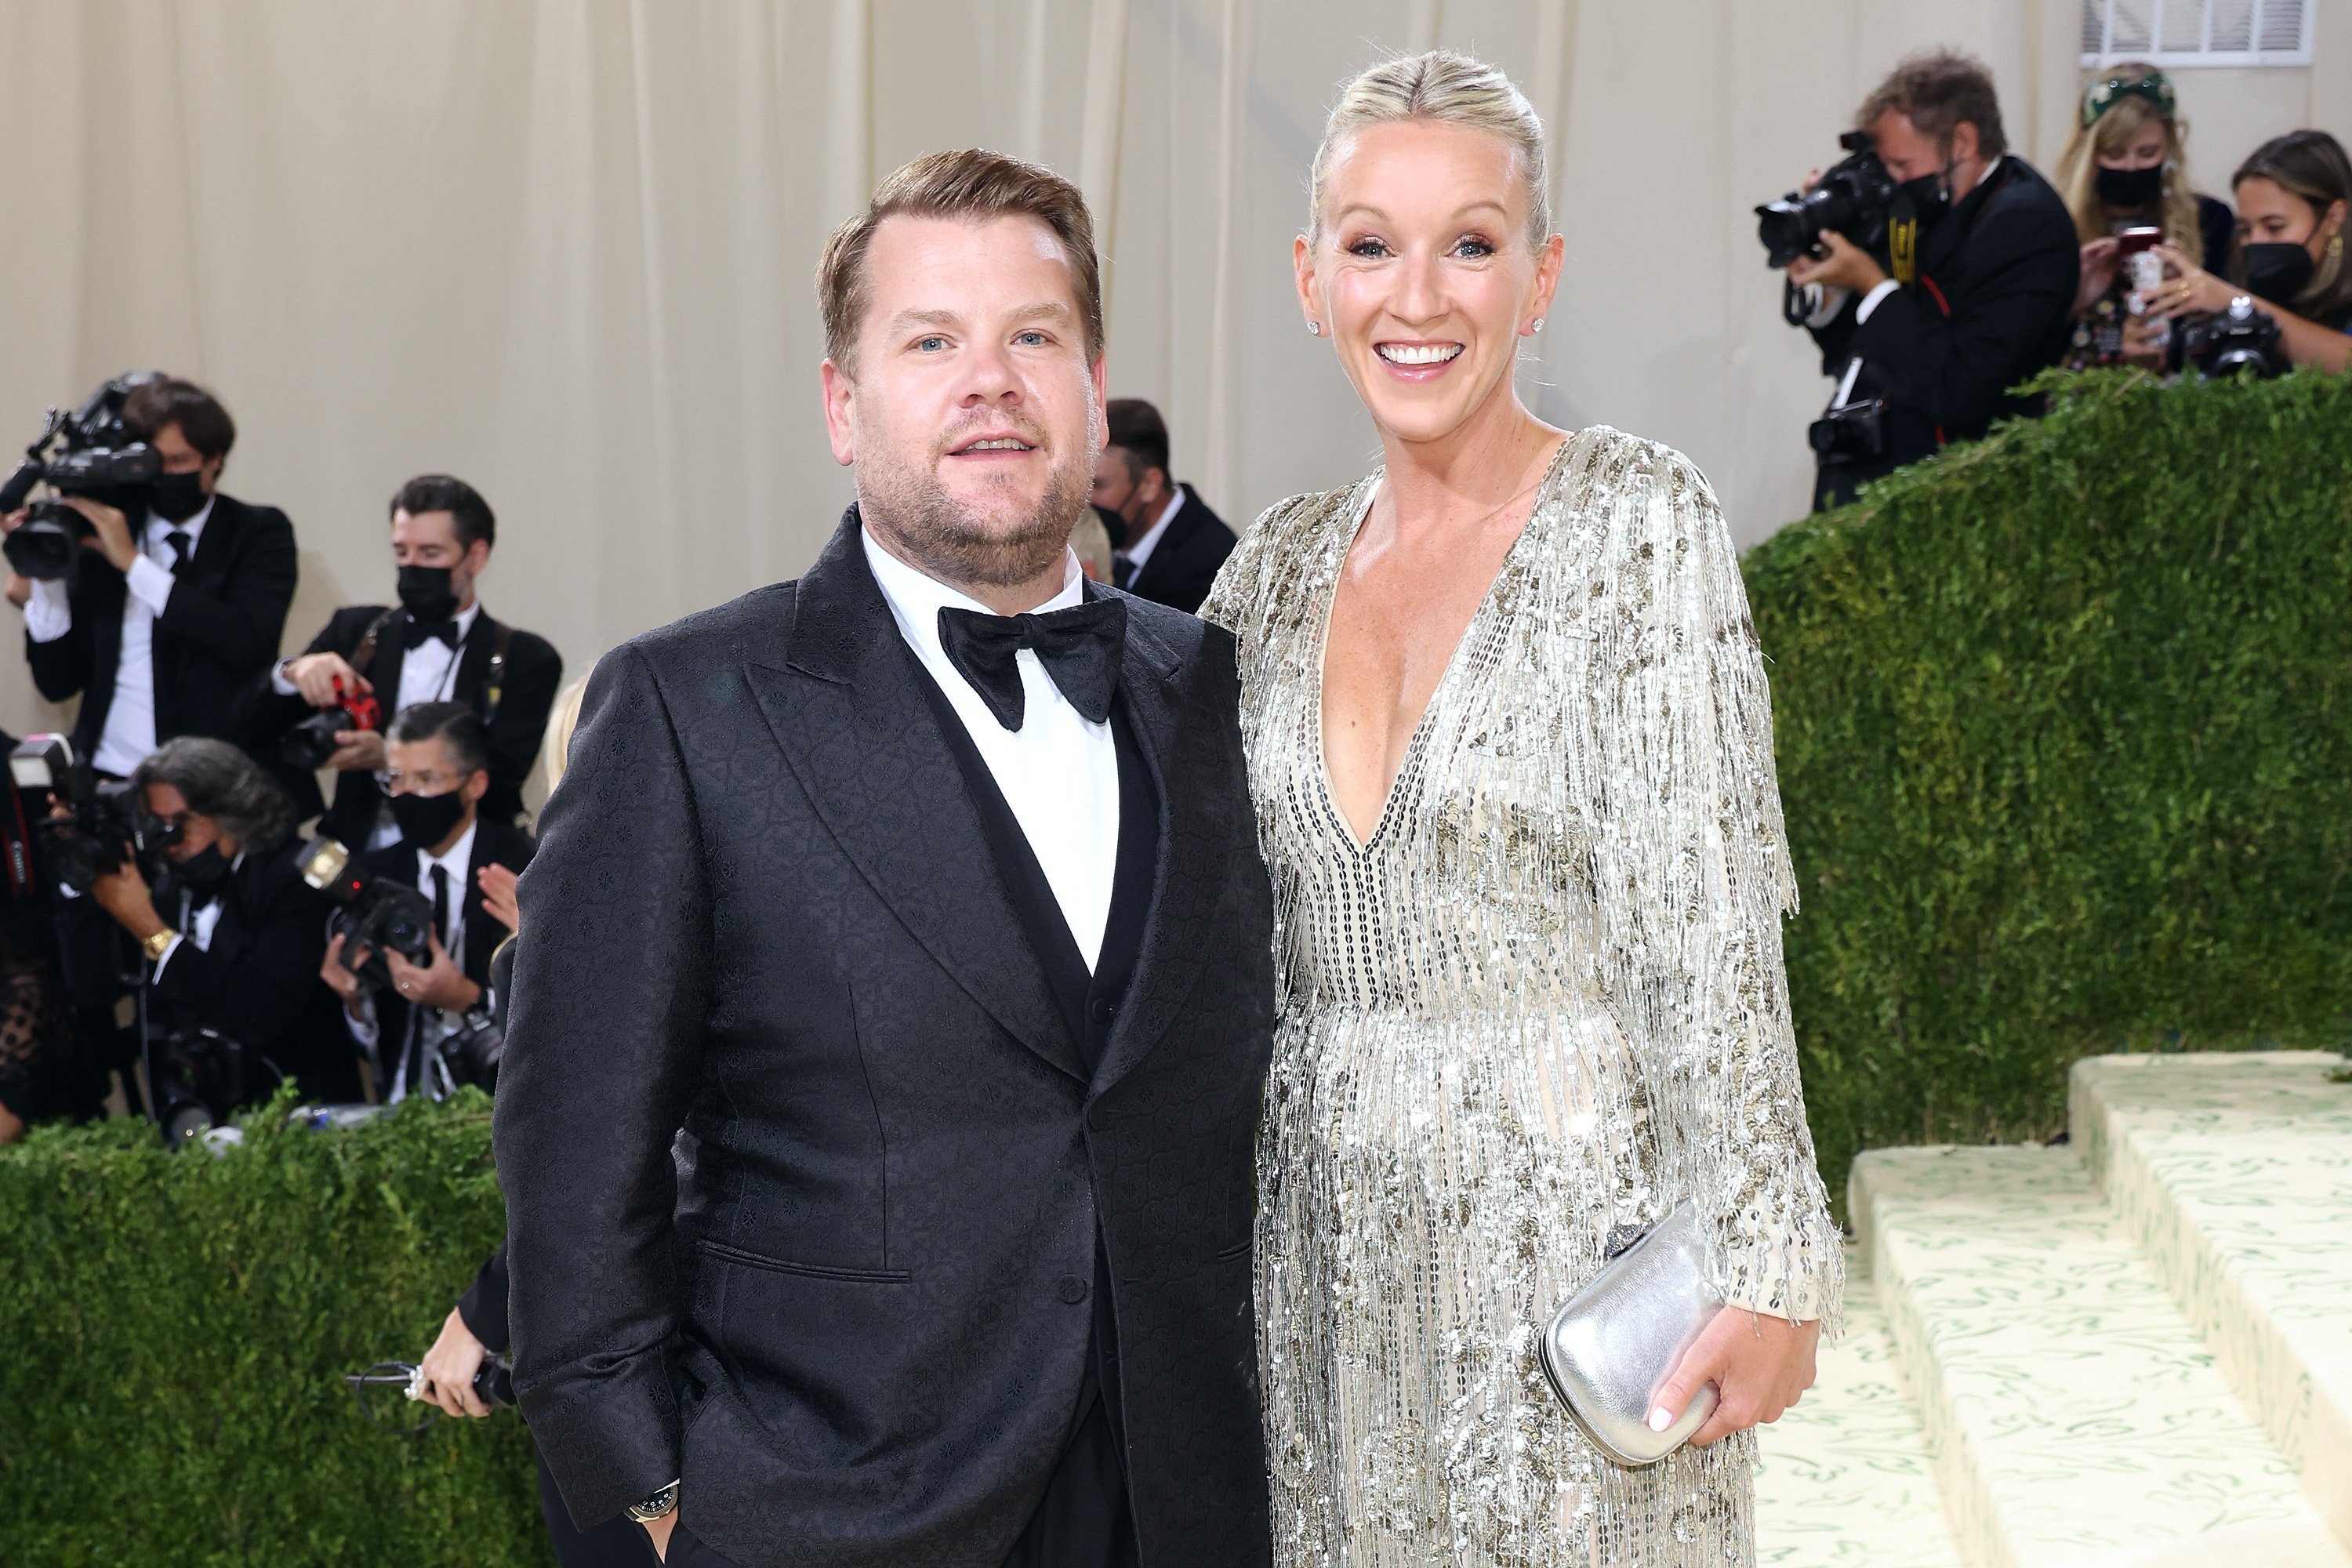 James Corden and Julia Carey at Metropolitan Museum of Art on September 13, 2021 in New York City. | Source: Getty Images